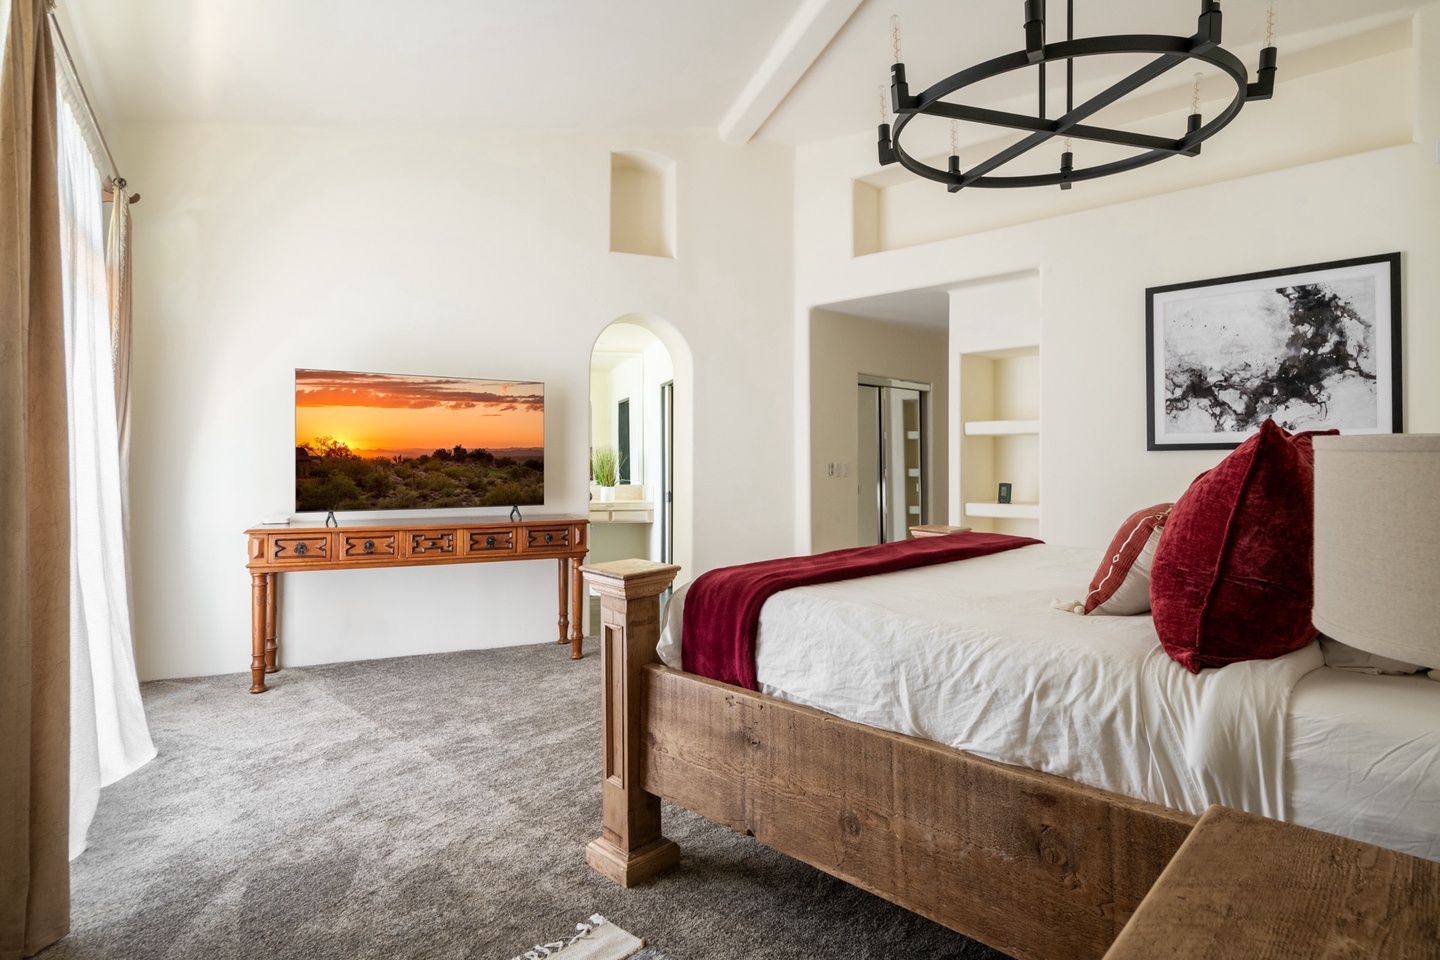 Master bedroom comes with a view and TV